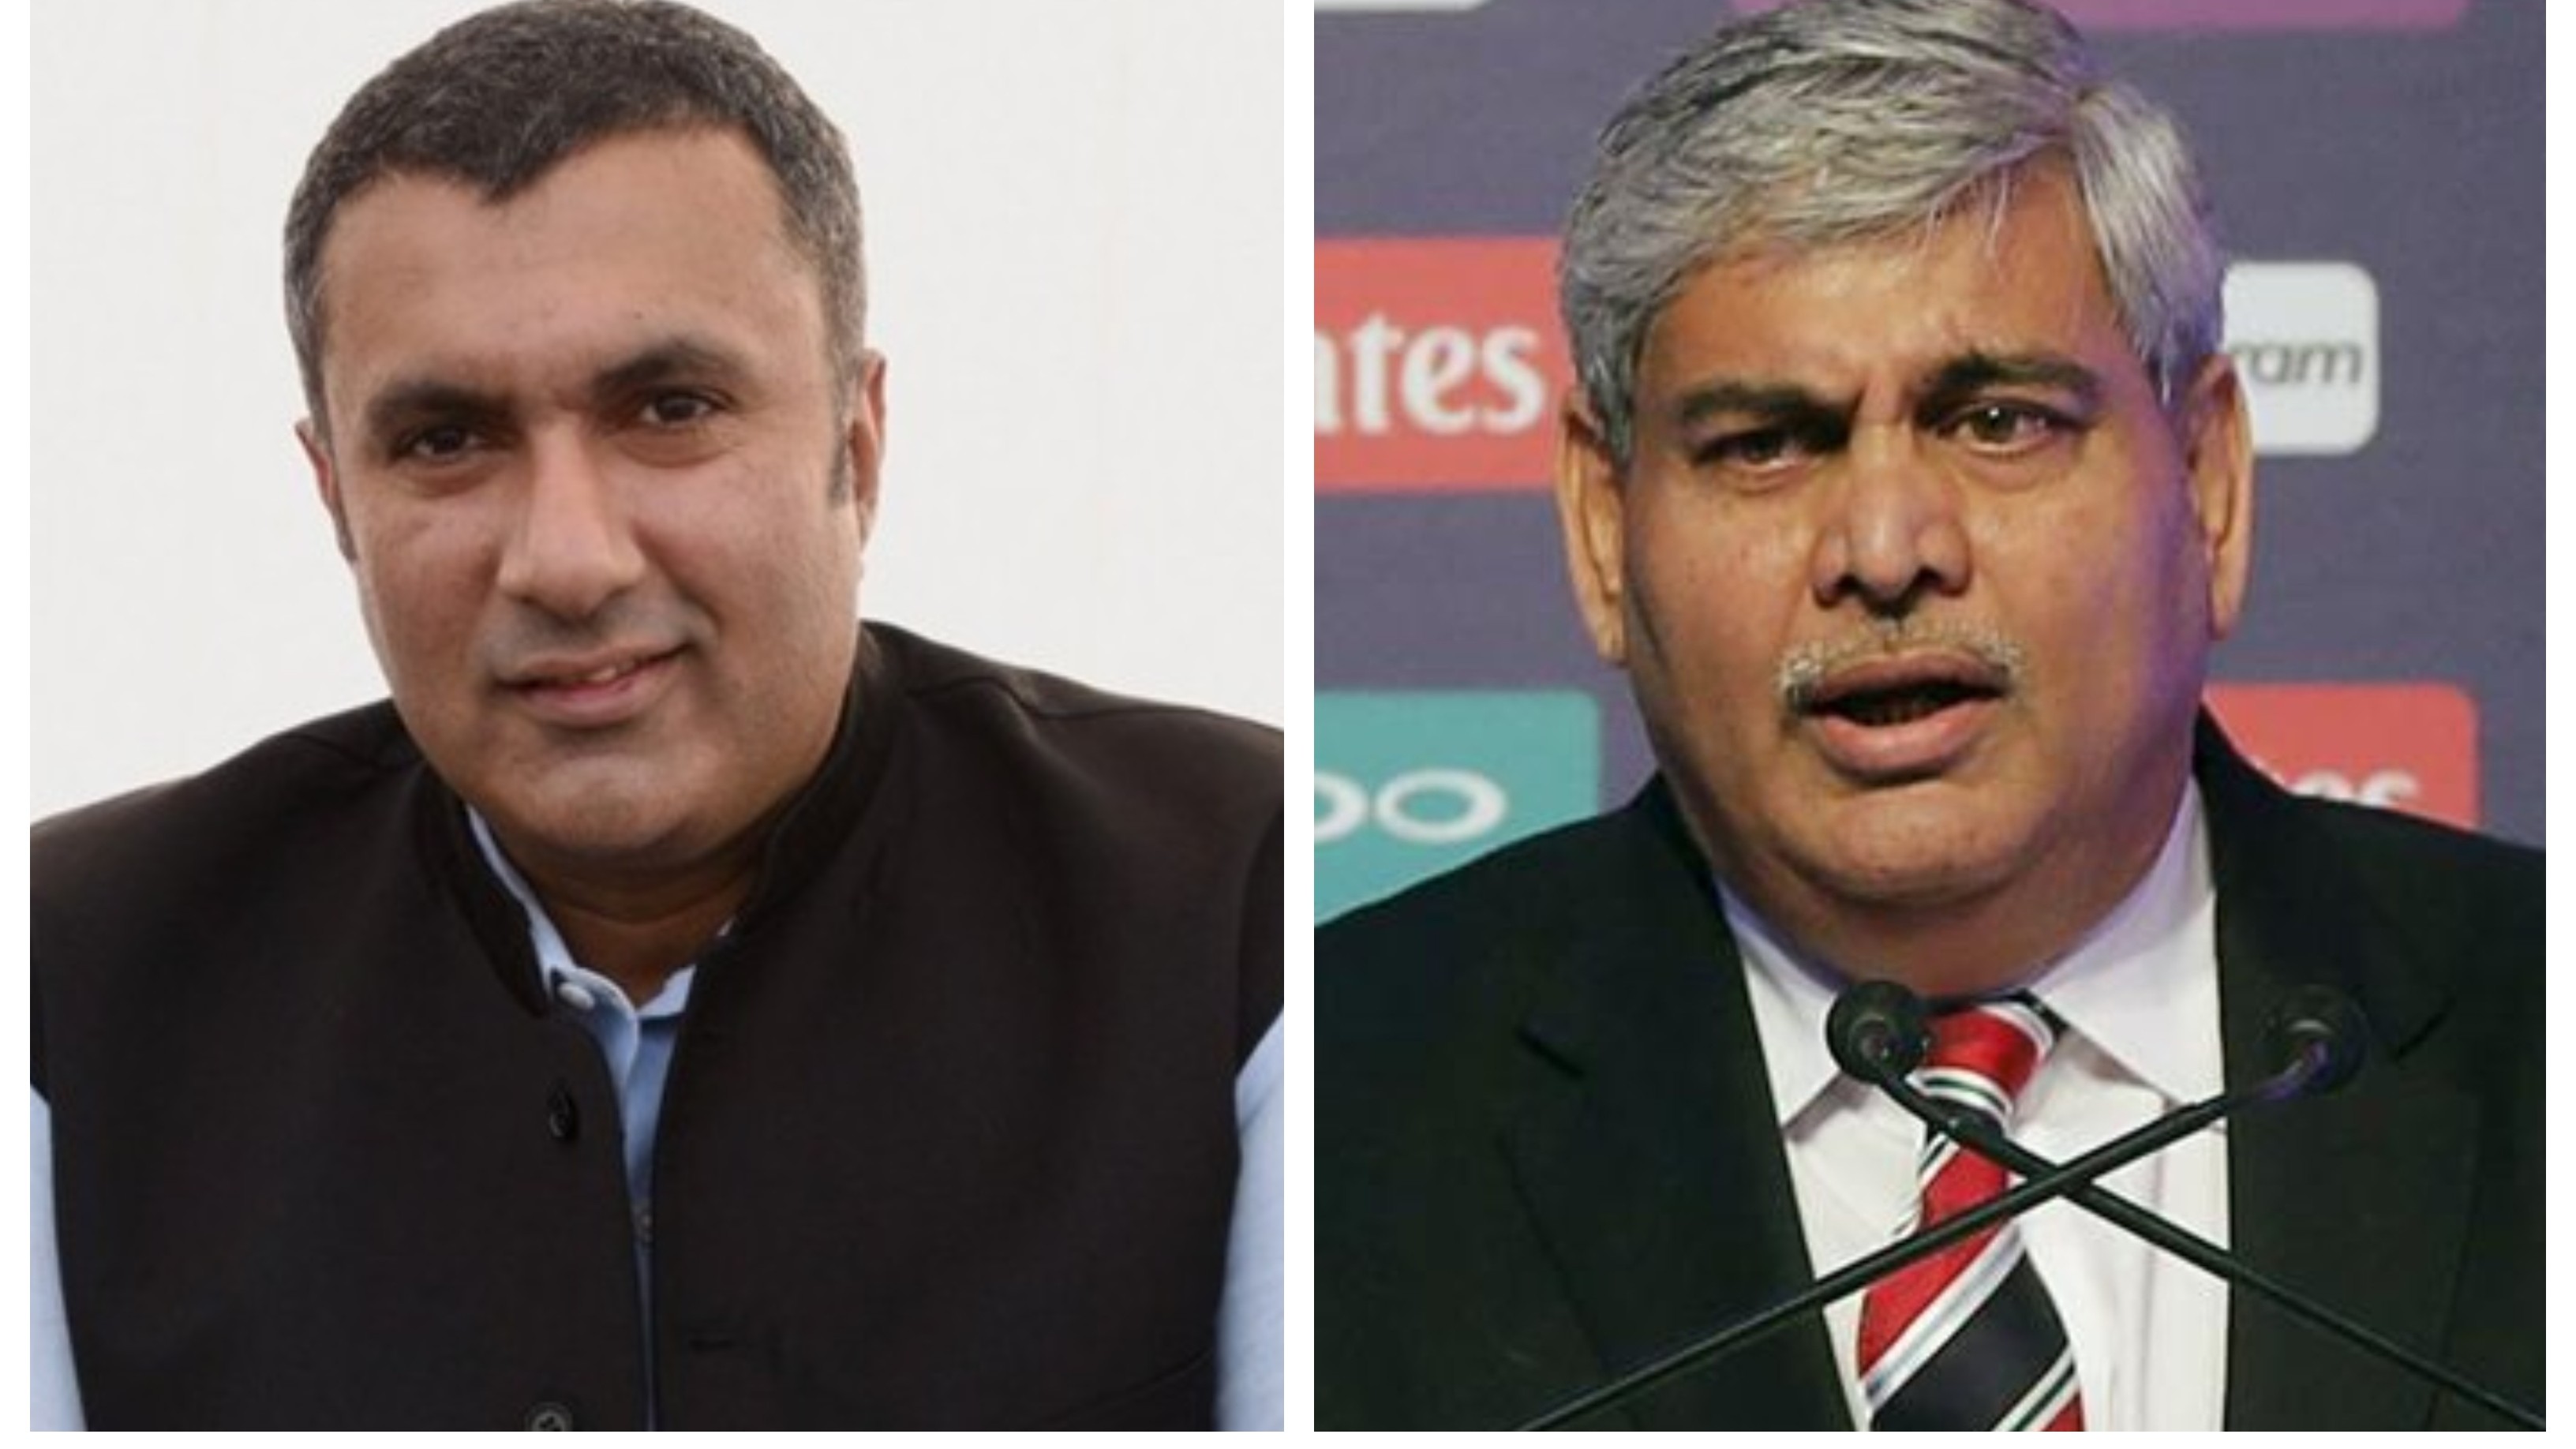 Shashank Manohar's ouster means BCCI's growing clout in ICC: Anirudh Chaudhry